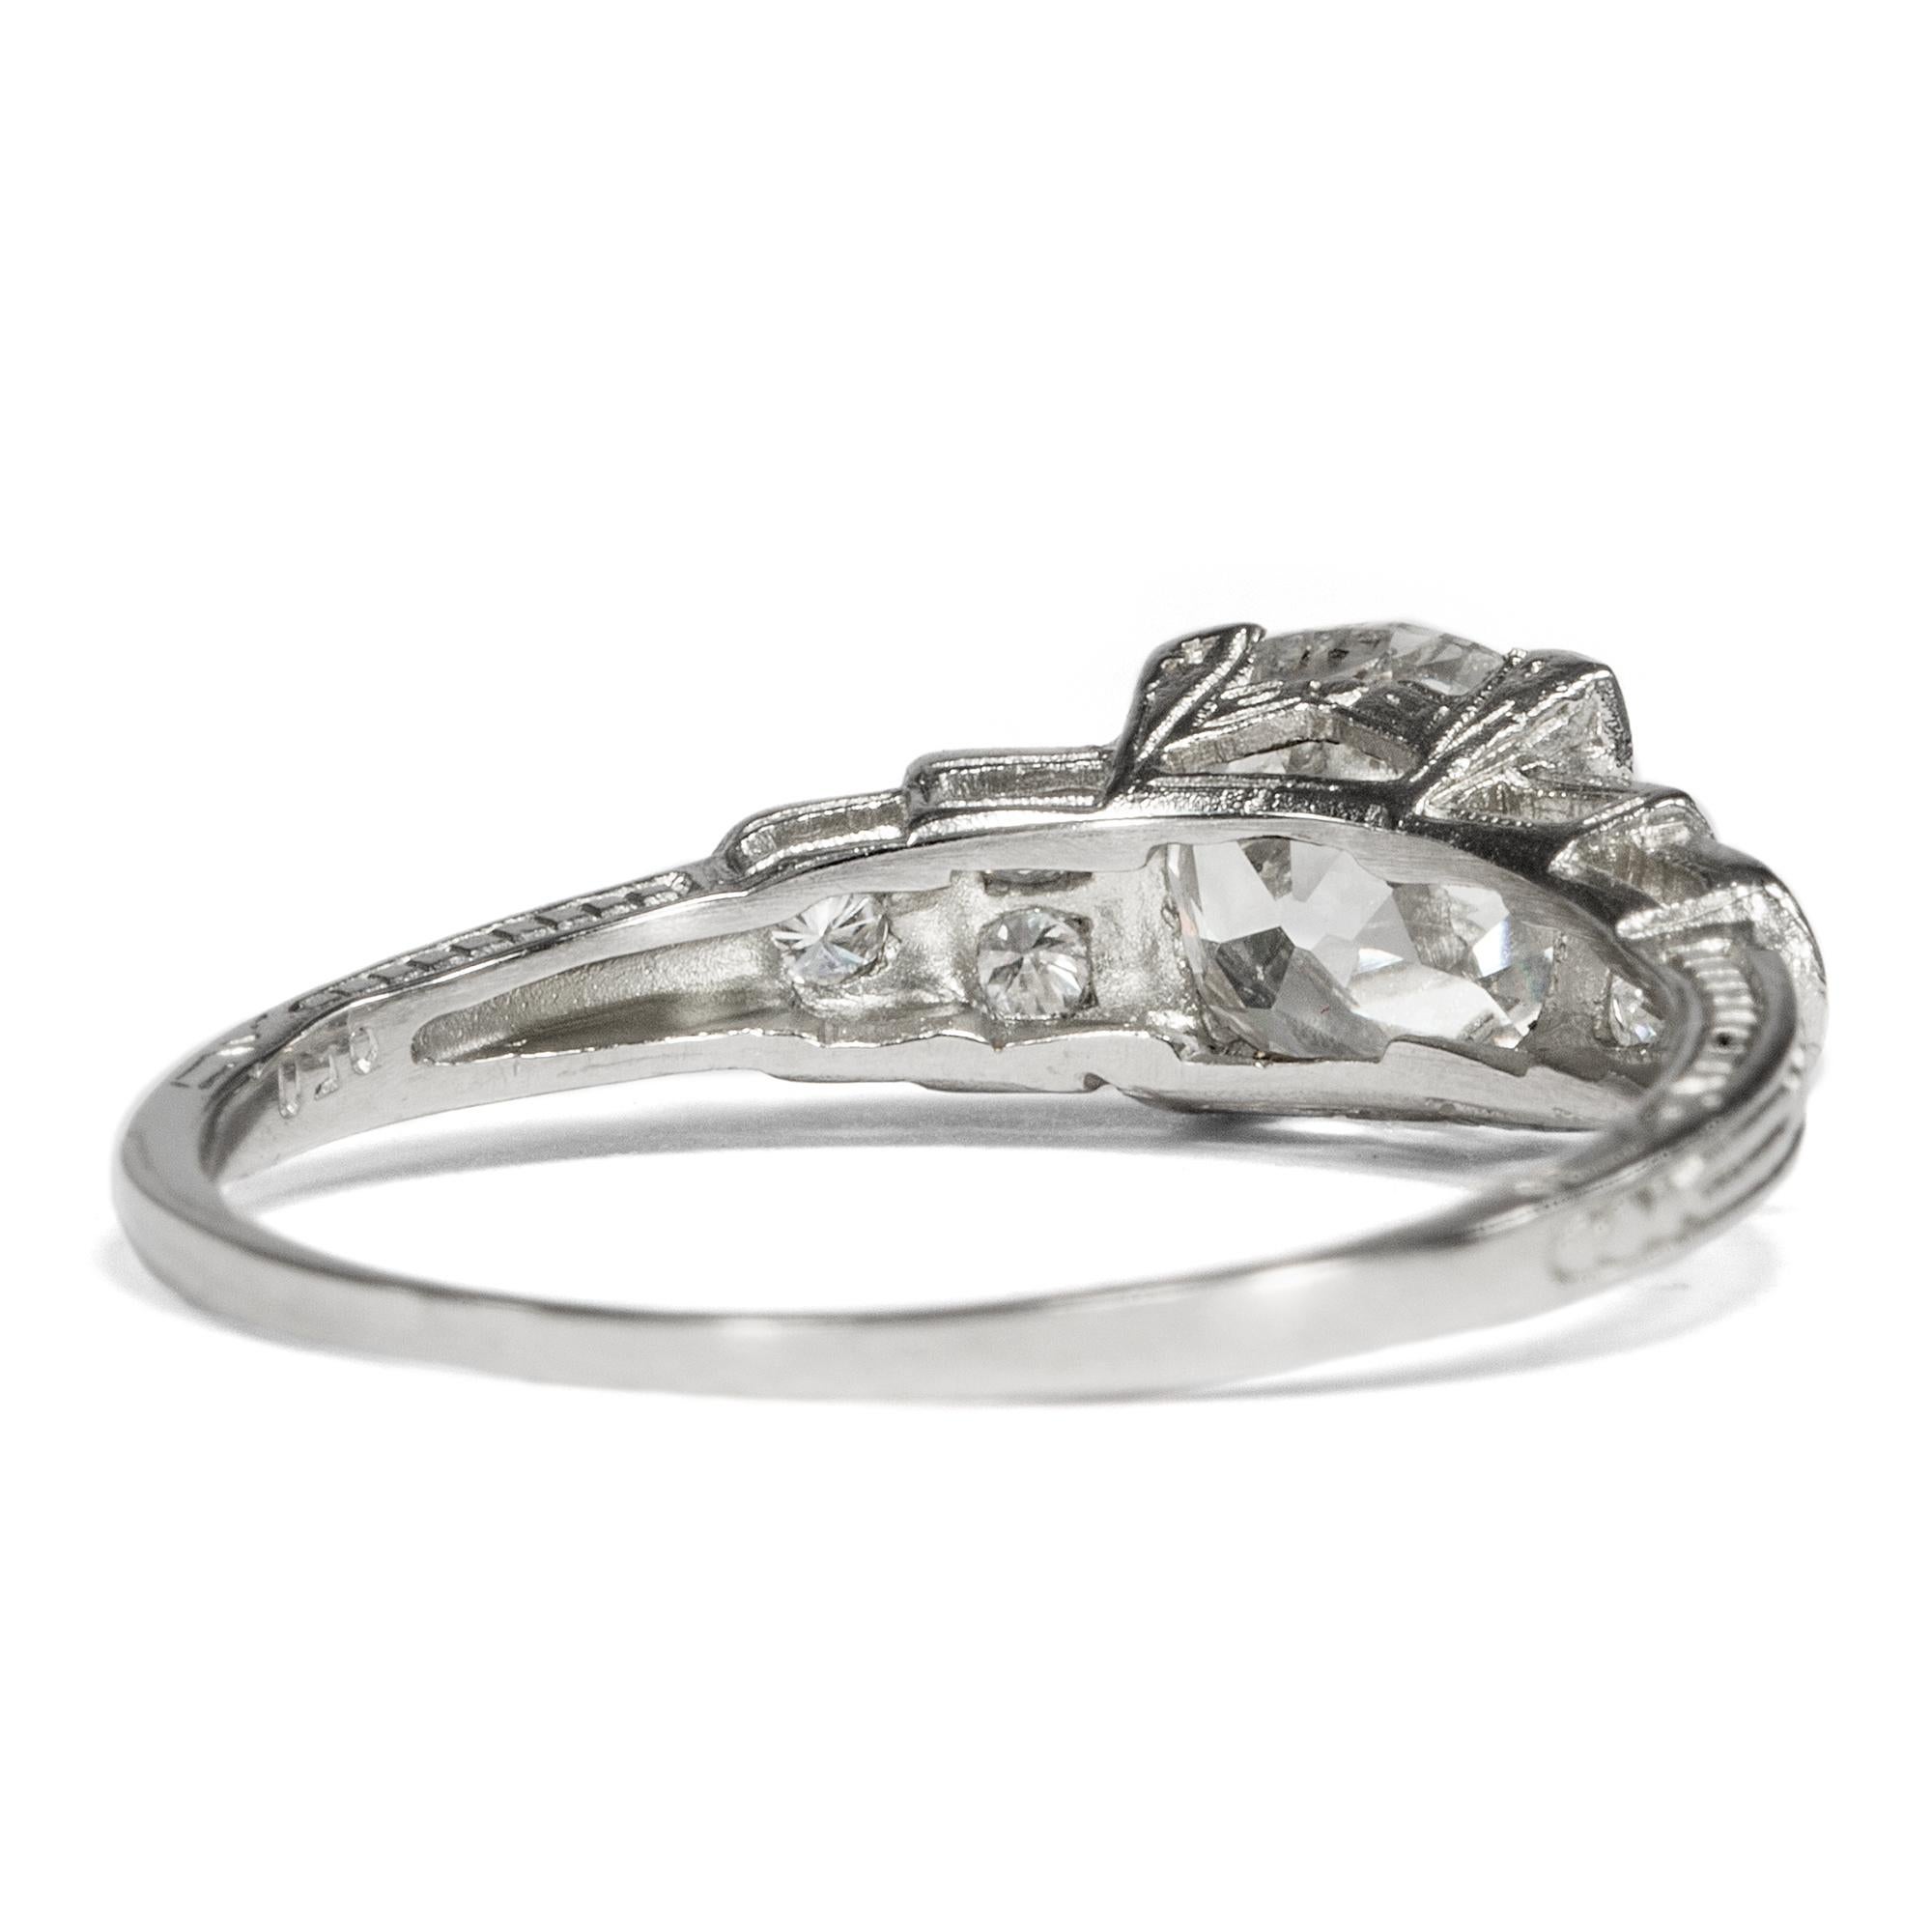 Women's or Men's Certified 1.24 Carat Antique Old European Cut Diamond in a Contemporary Ring